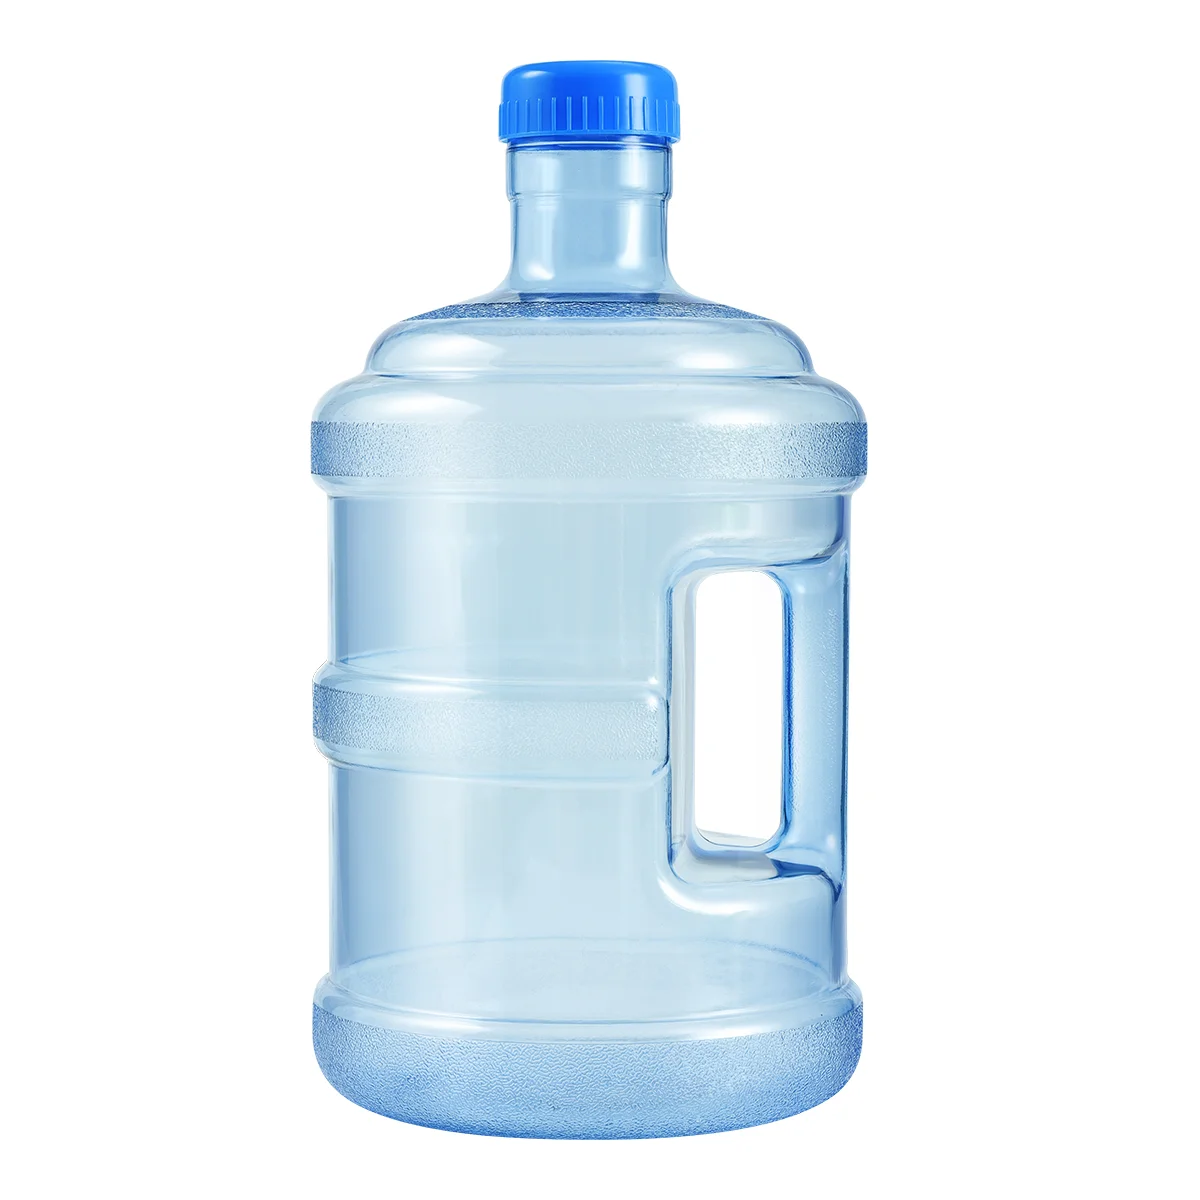 

Liters of Portable Water Storage Tub Water Barrel Mineral Water Bottle for Car School Office for Outdoor Camping